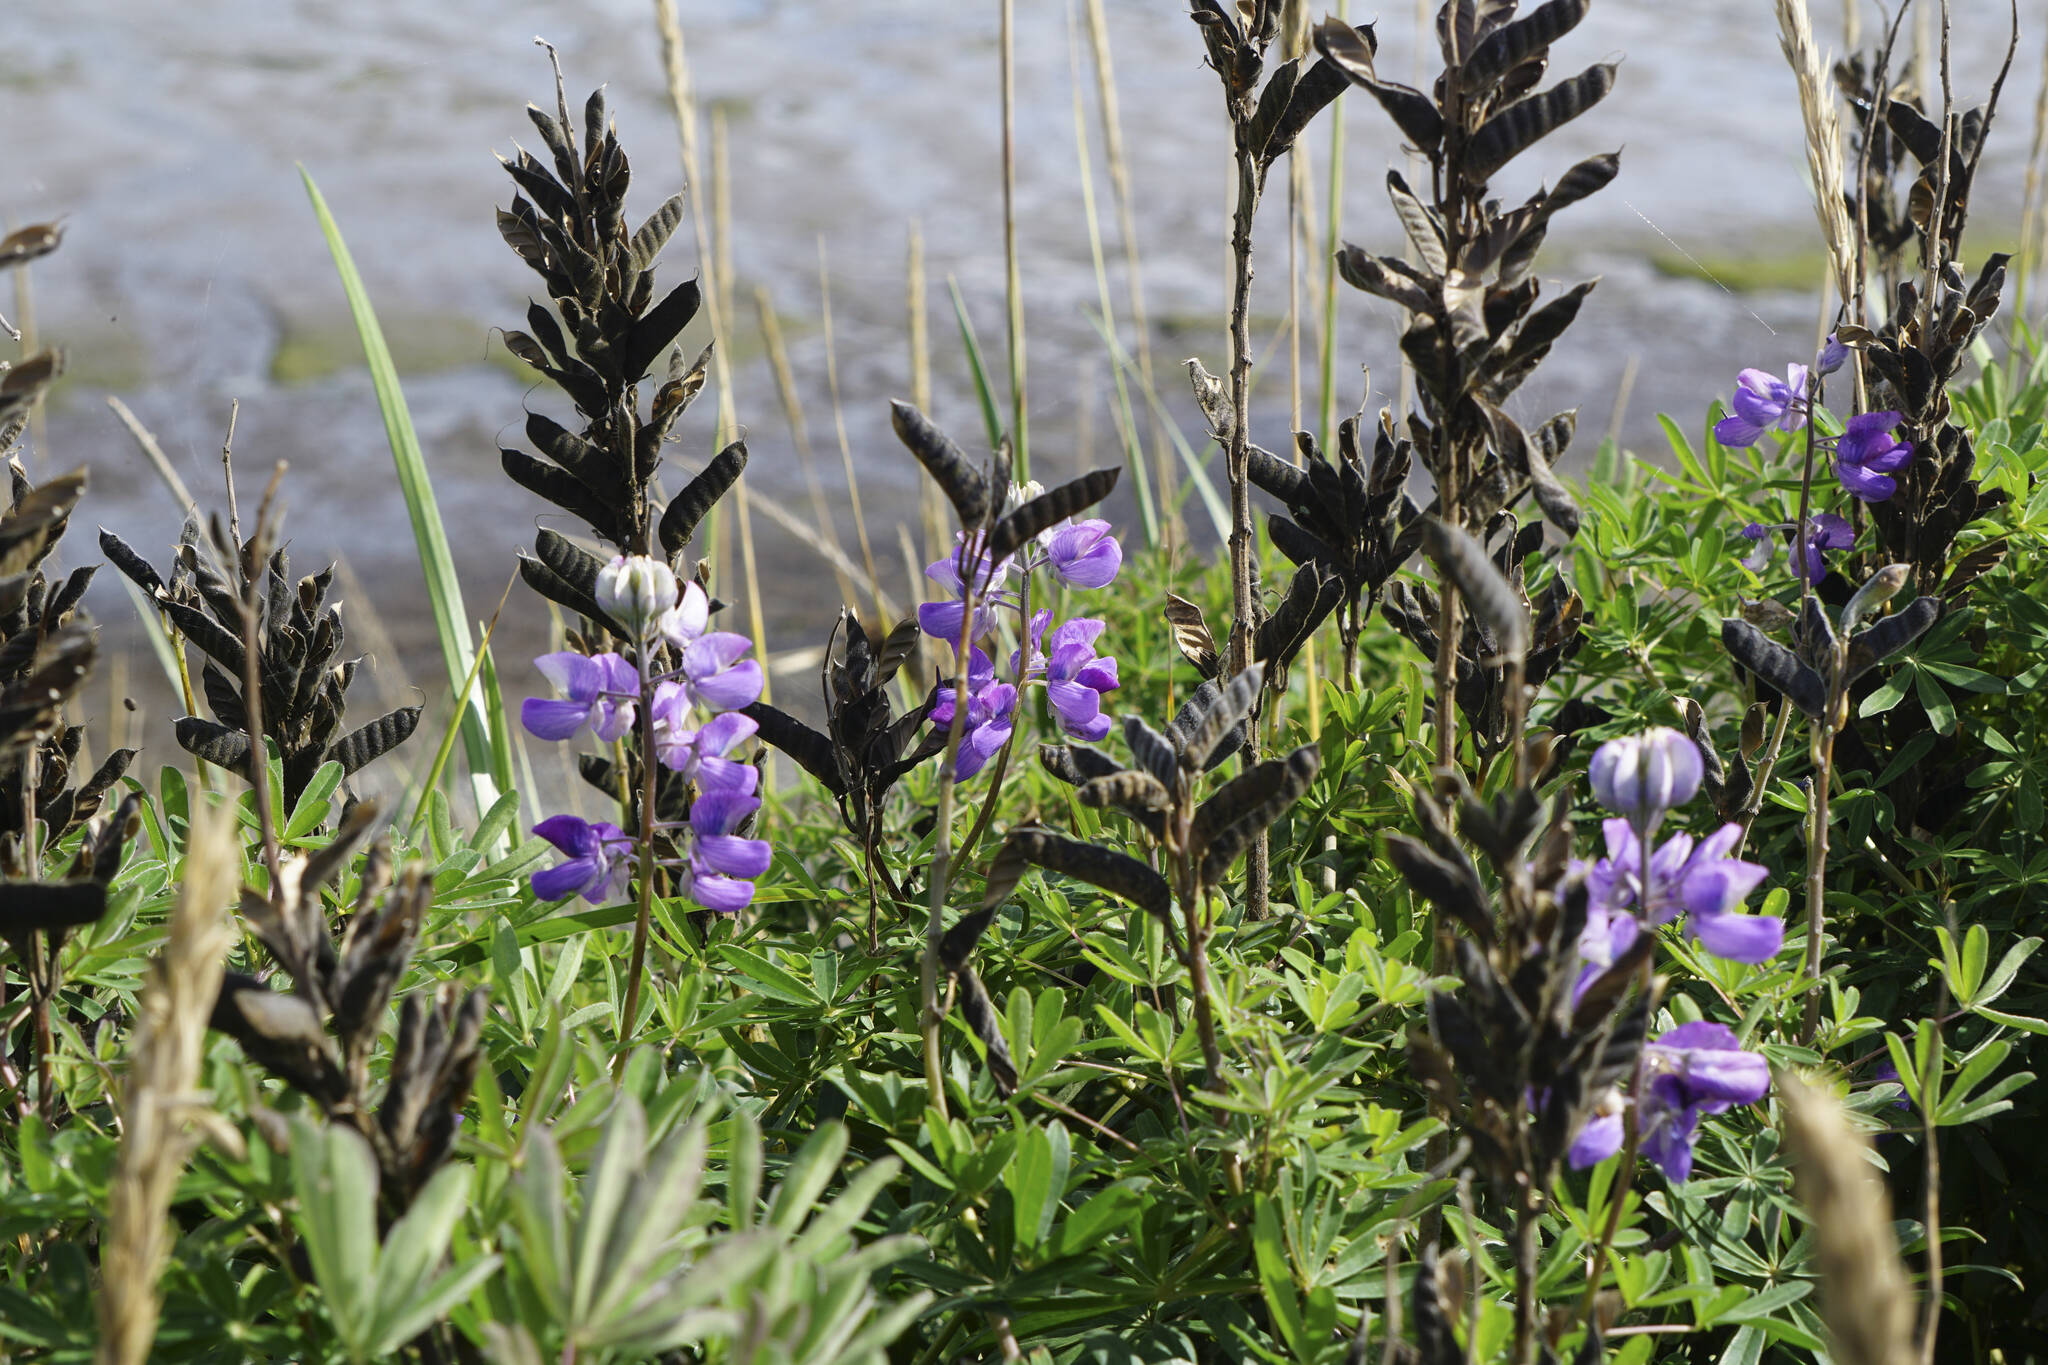 All but a few lupine flowers had gone to seed on Monday, Aug. 29, 2022, along the Homer Spit Trail in Homer, Alaska. (Photo by Michael Armstrong/Homer News)